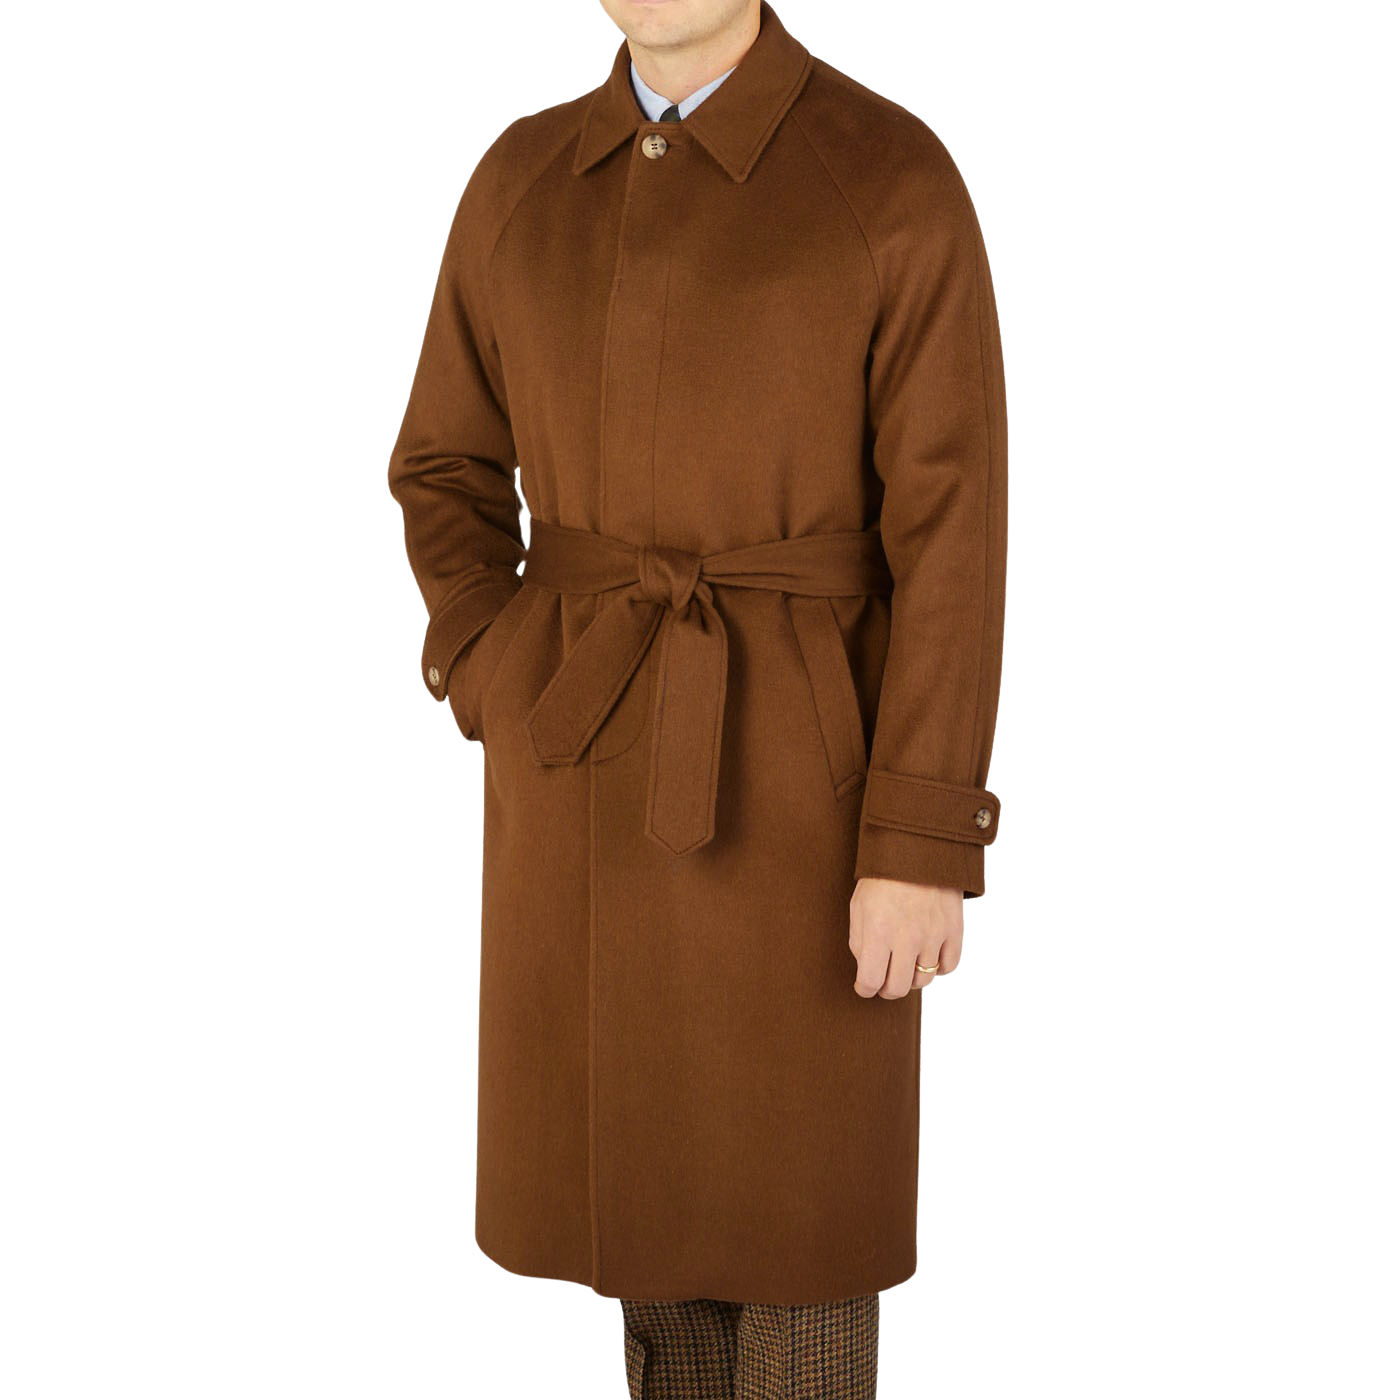 A contemporary man with a Studio 73 twist, confidently sporting a Dark Brown Camel Wool Cashmere Raglan Coat.